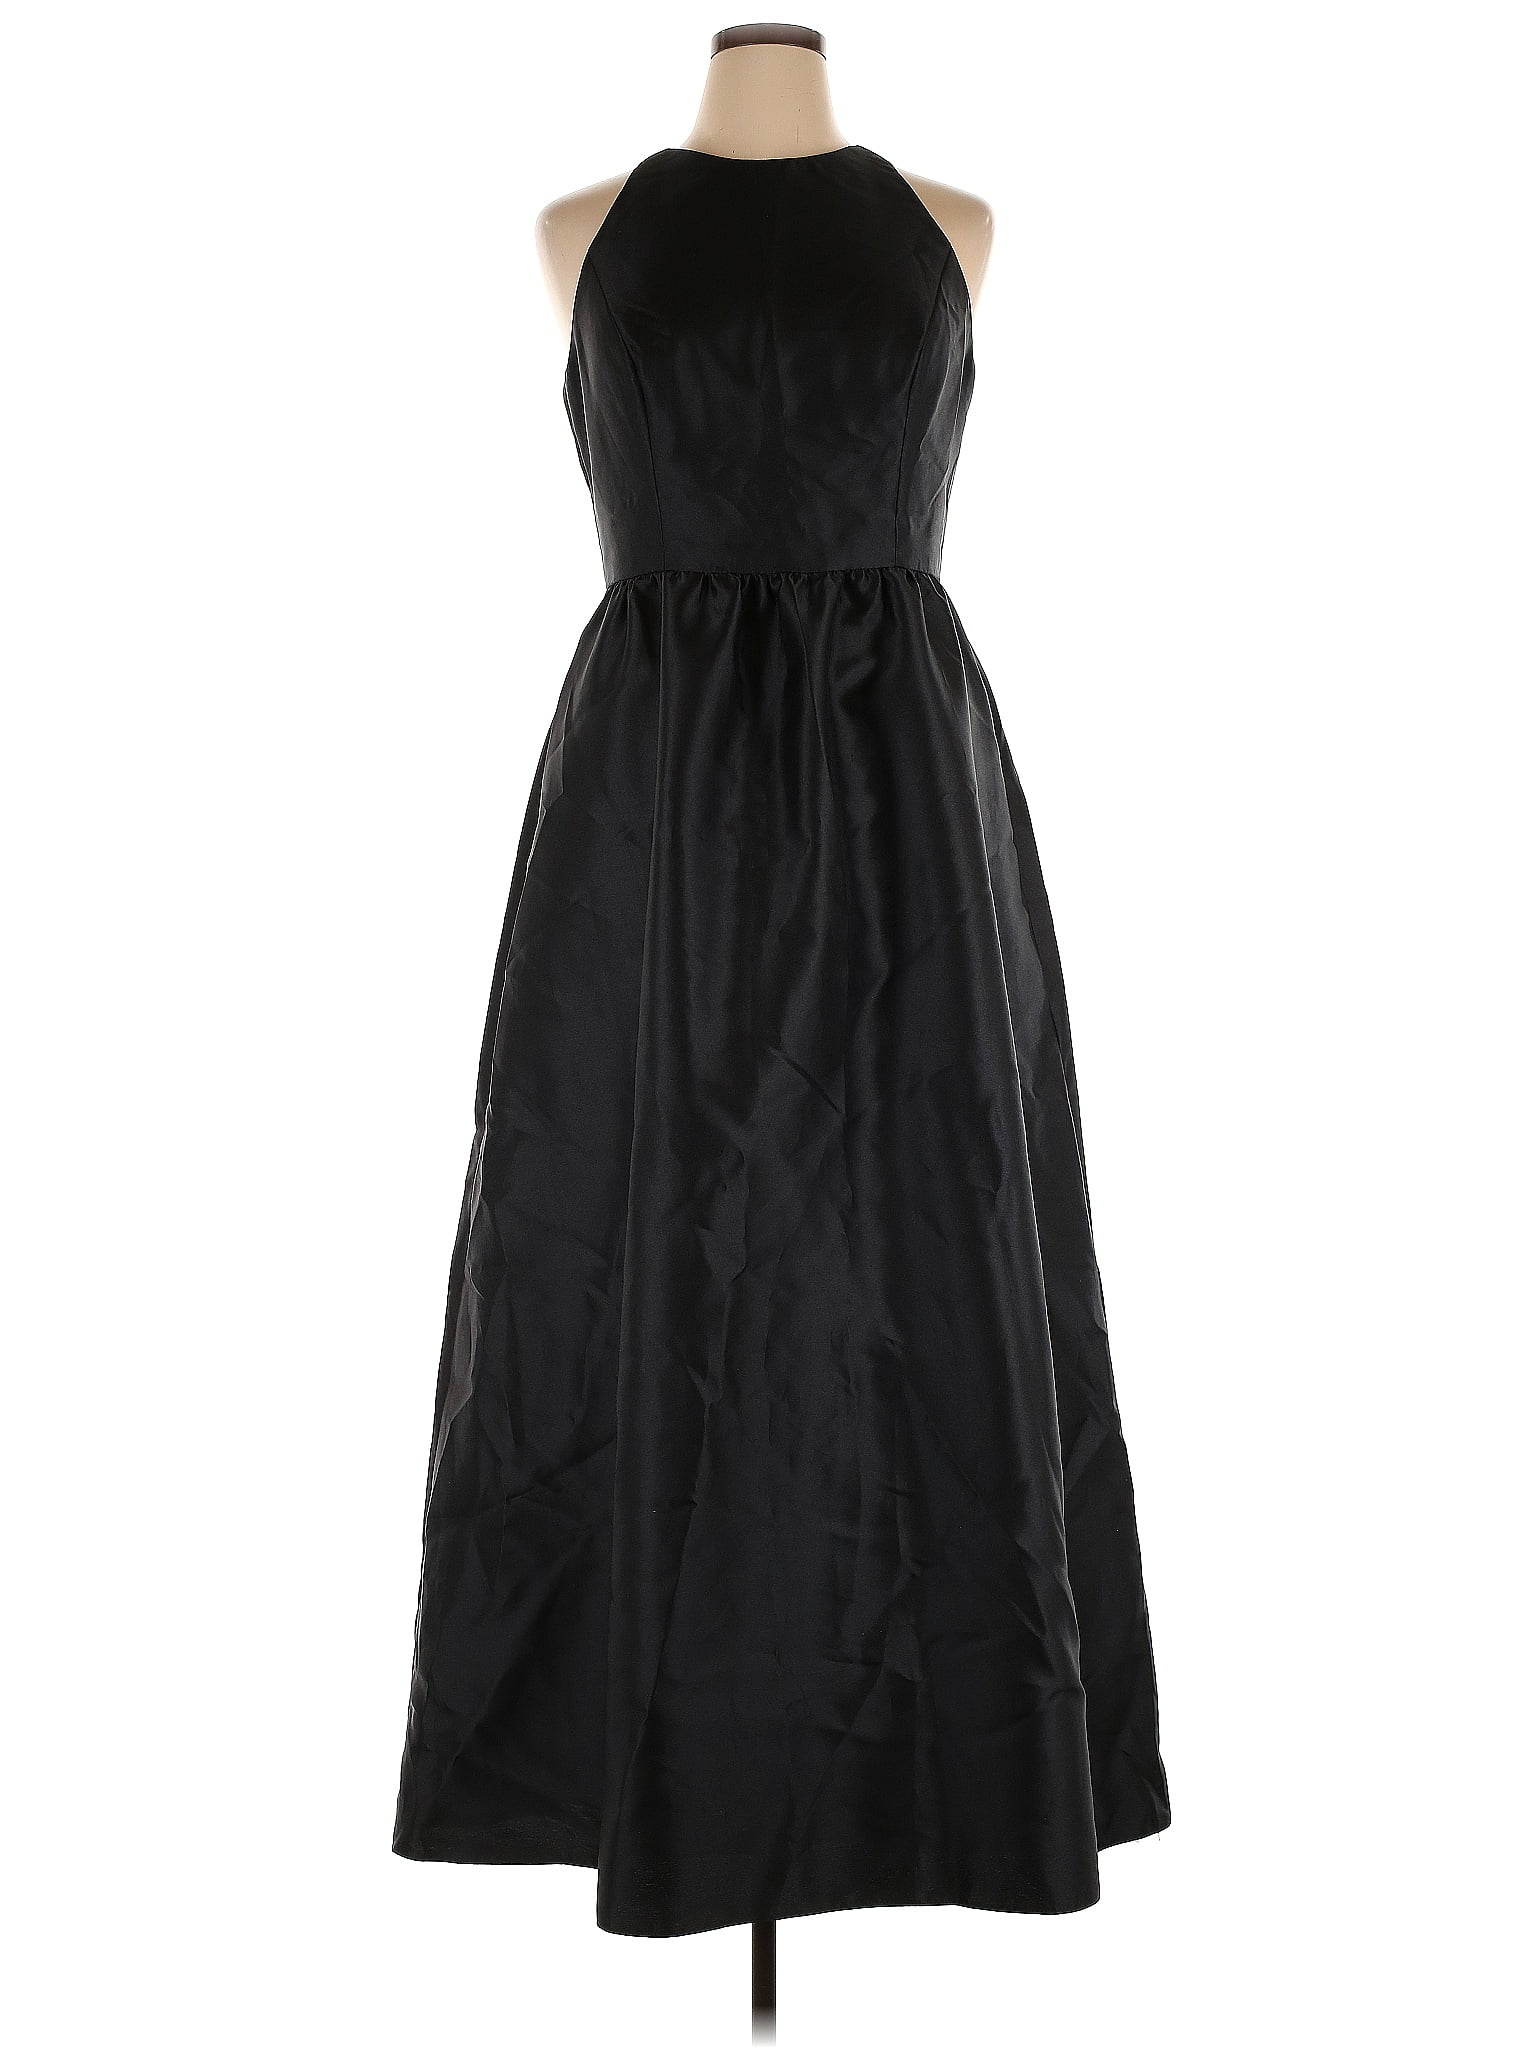 Alfred Sung 100% Polyester Solid Black Cocktail Dress Size 16 - 67% off ...